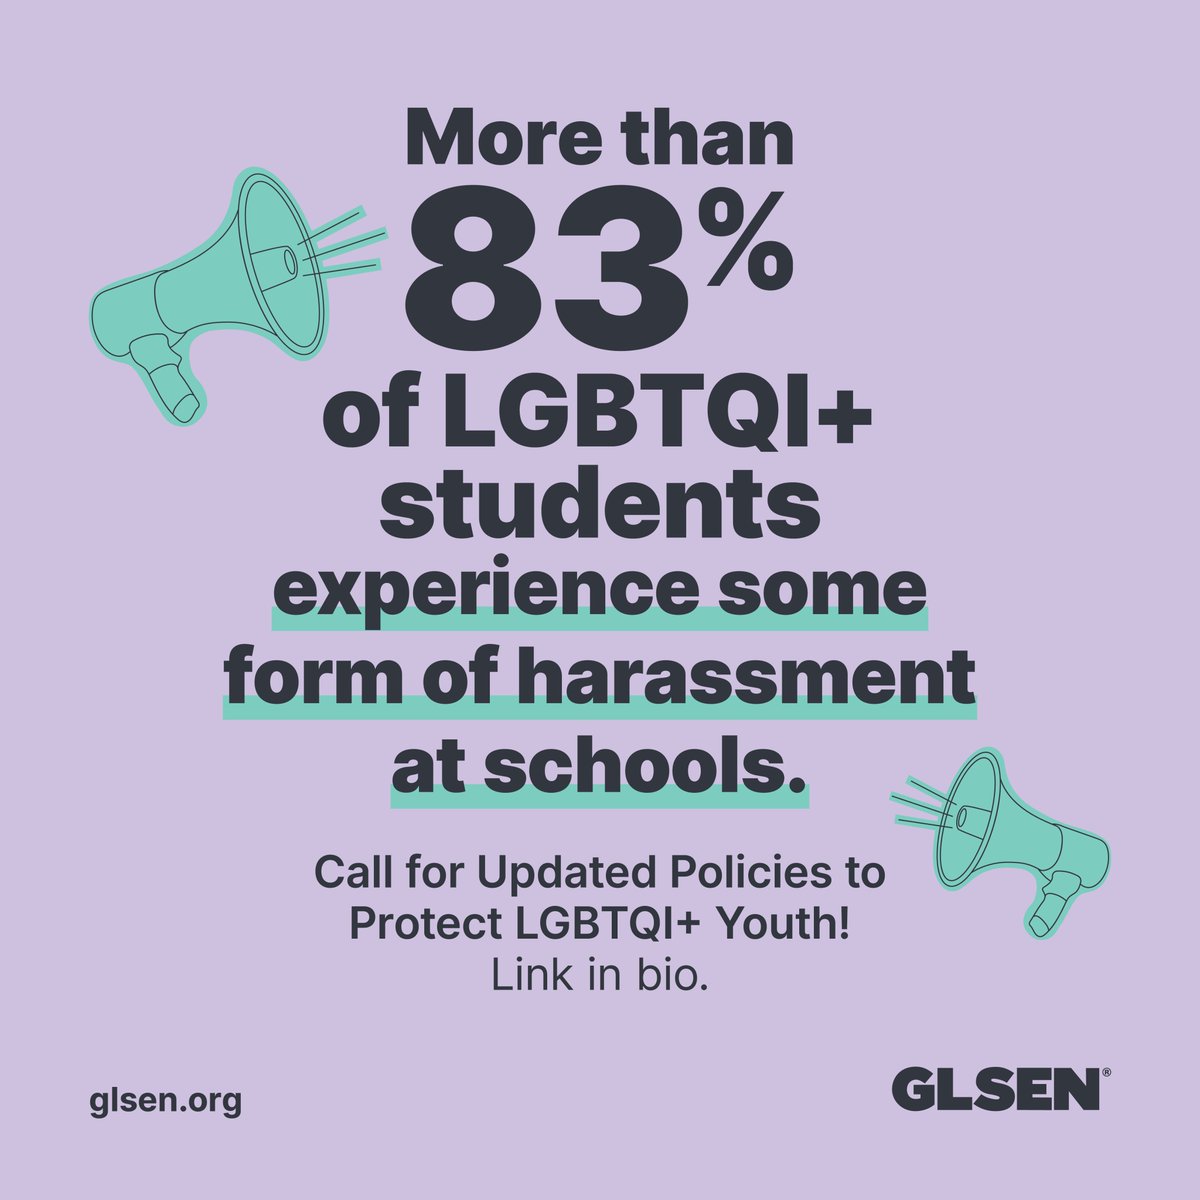 Today is @GLSEN’s #DayOfNoSilence — a national day of action pushing back against the silencing of LGBTQ+ youth and the erasure of their experiences. Join me and #RiseUp4LGBTQ youth! → glsen.org/DayOfNoSilence